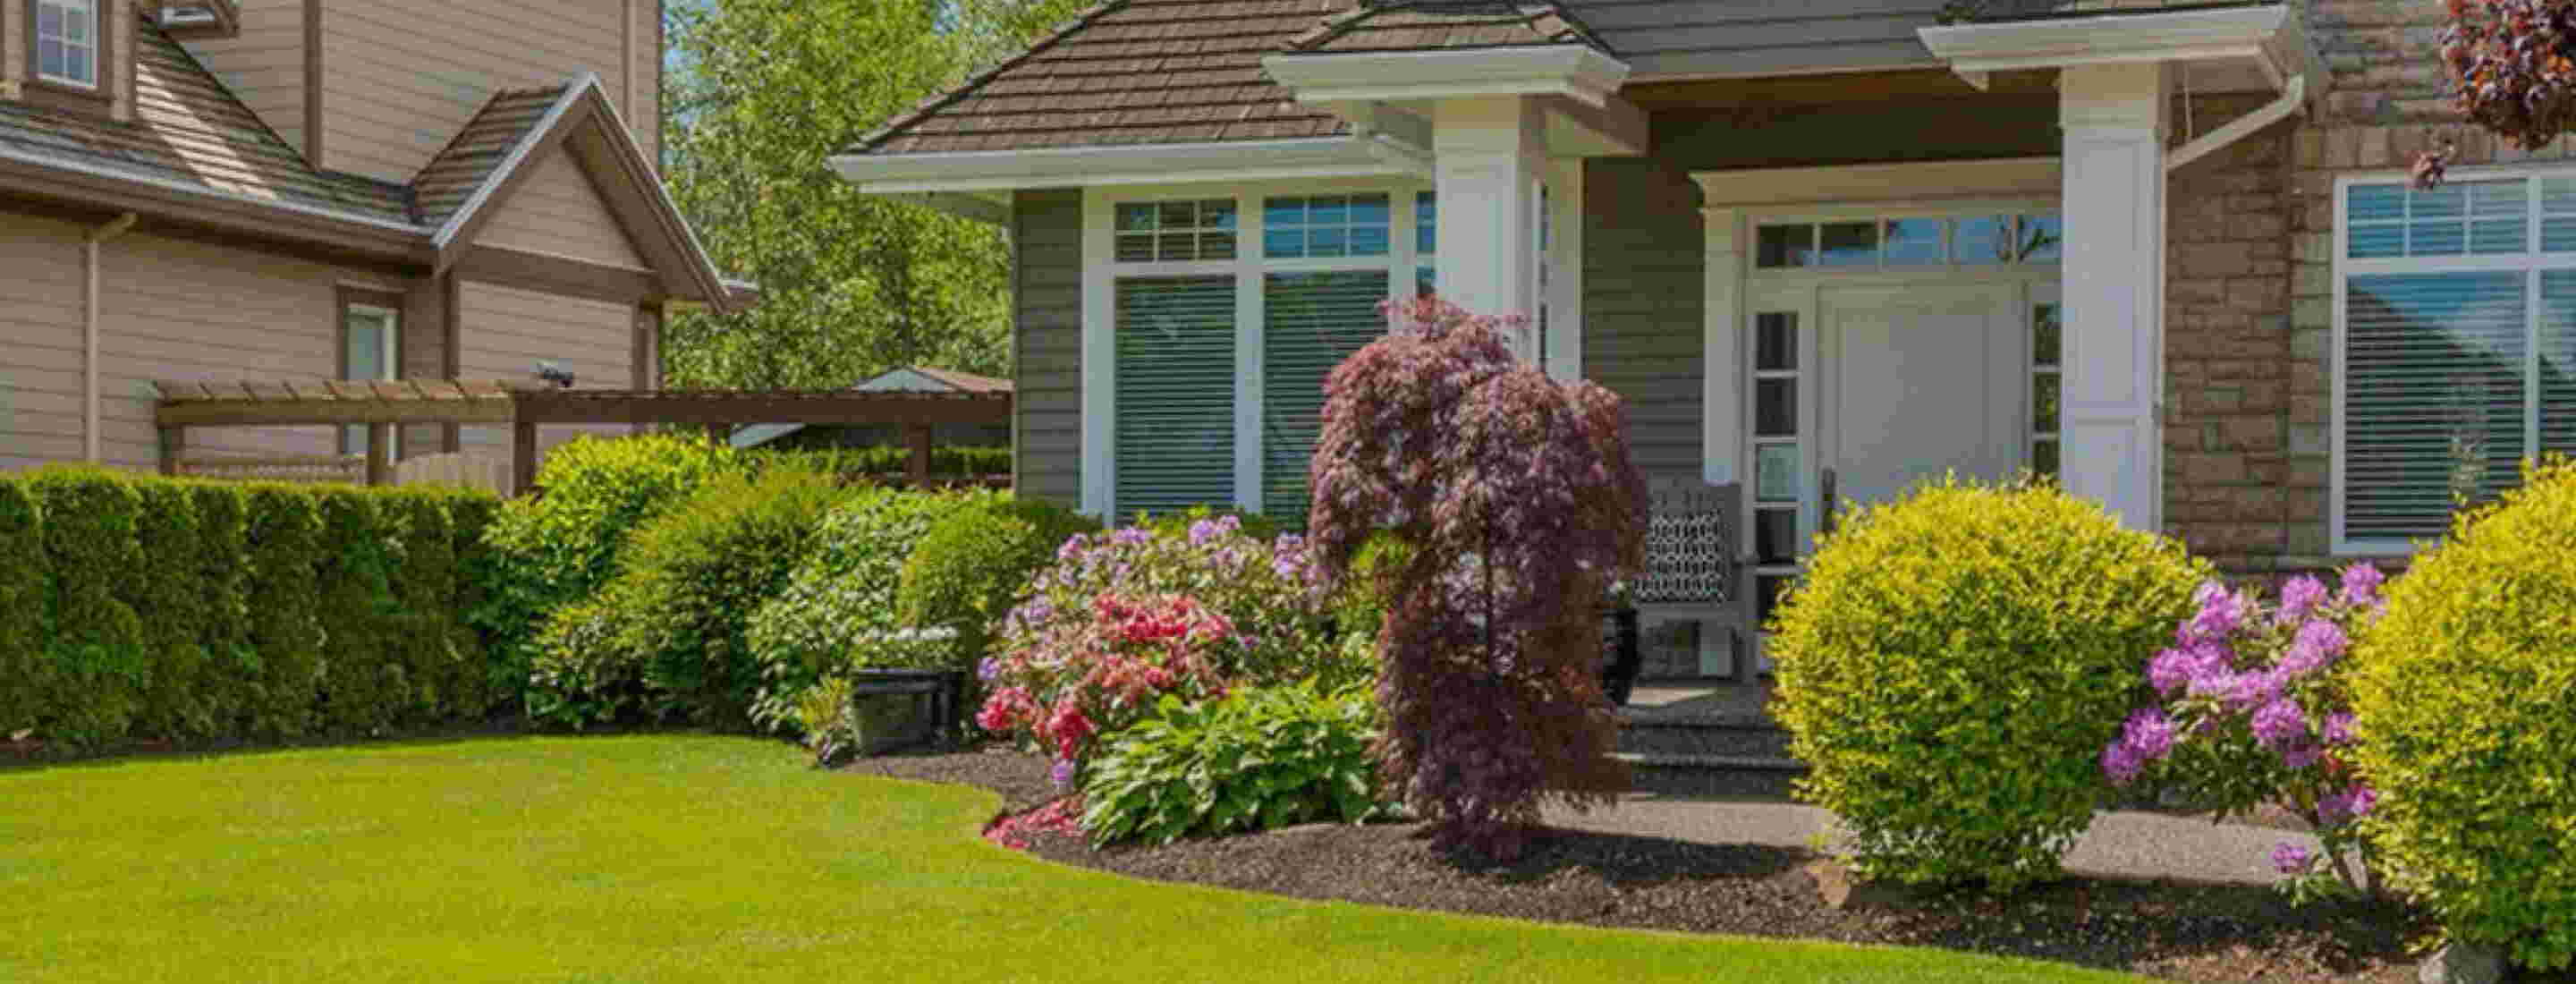 home with landscaping grounds guys header